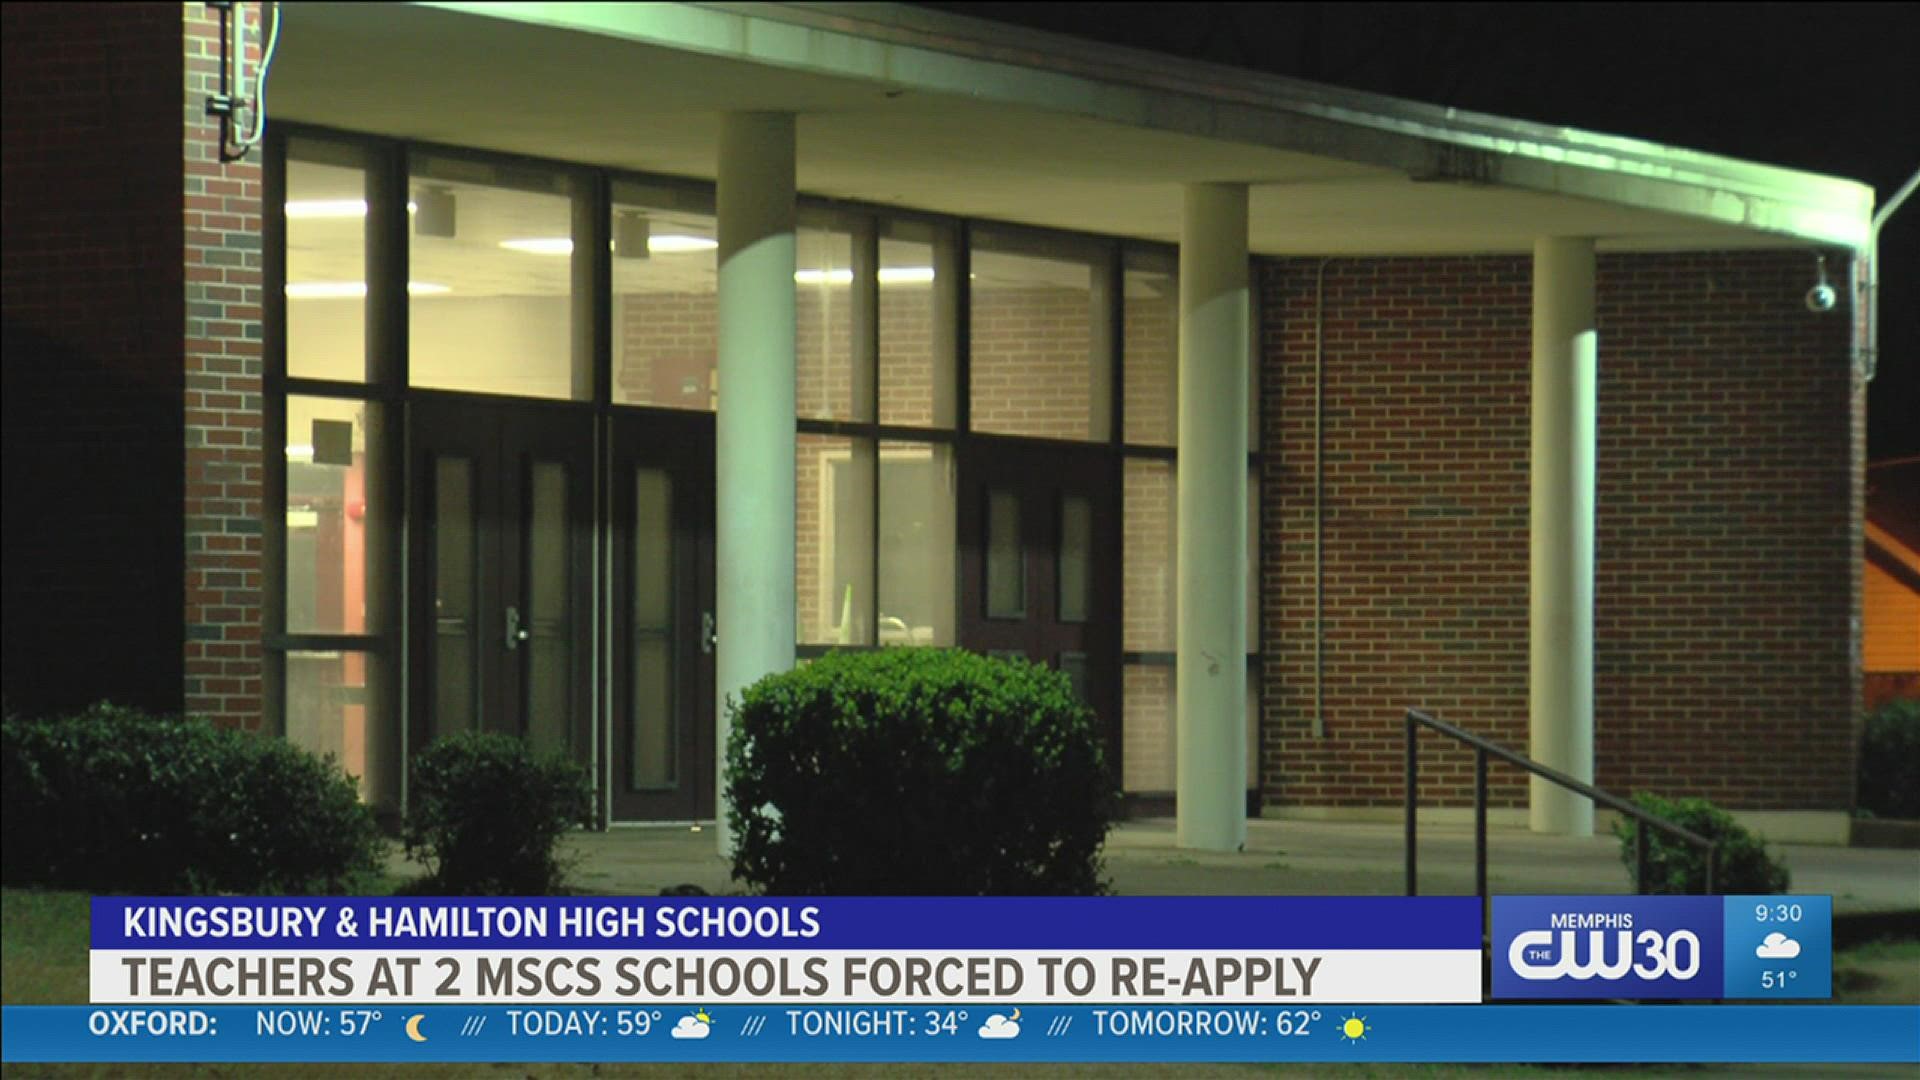 The school district is forcing dozens of teachers at Kingsbury High School and Hamilton High School to reapply for jobs as part of a 'Fresh Start' process.